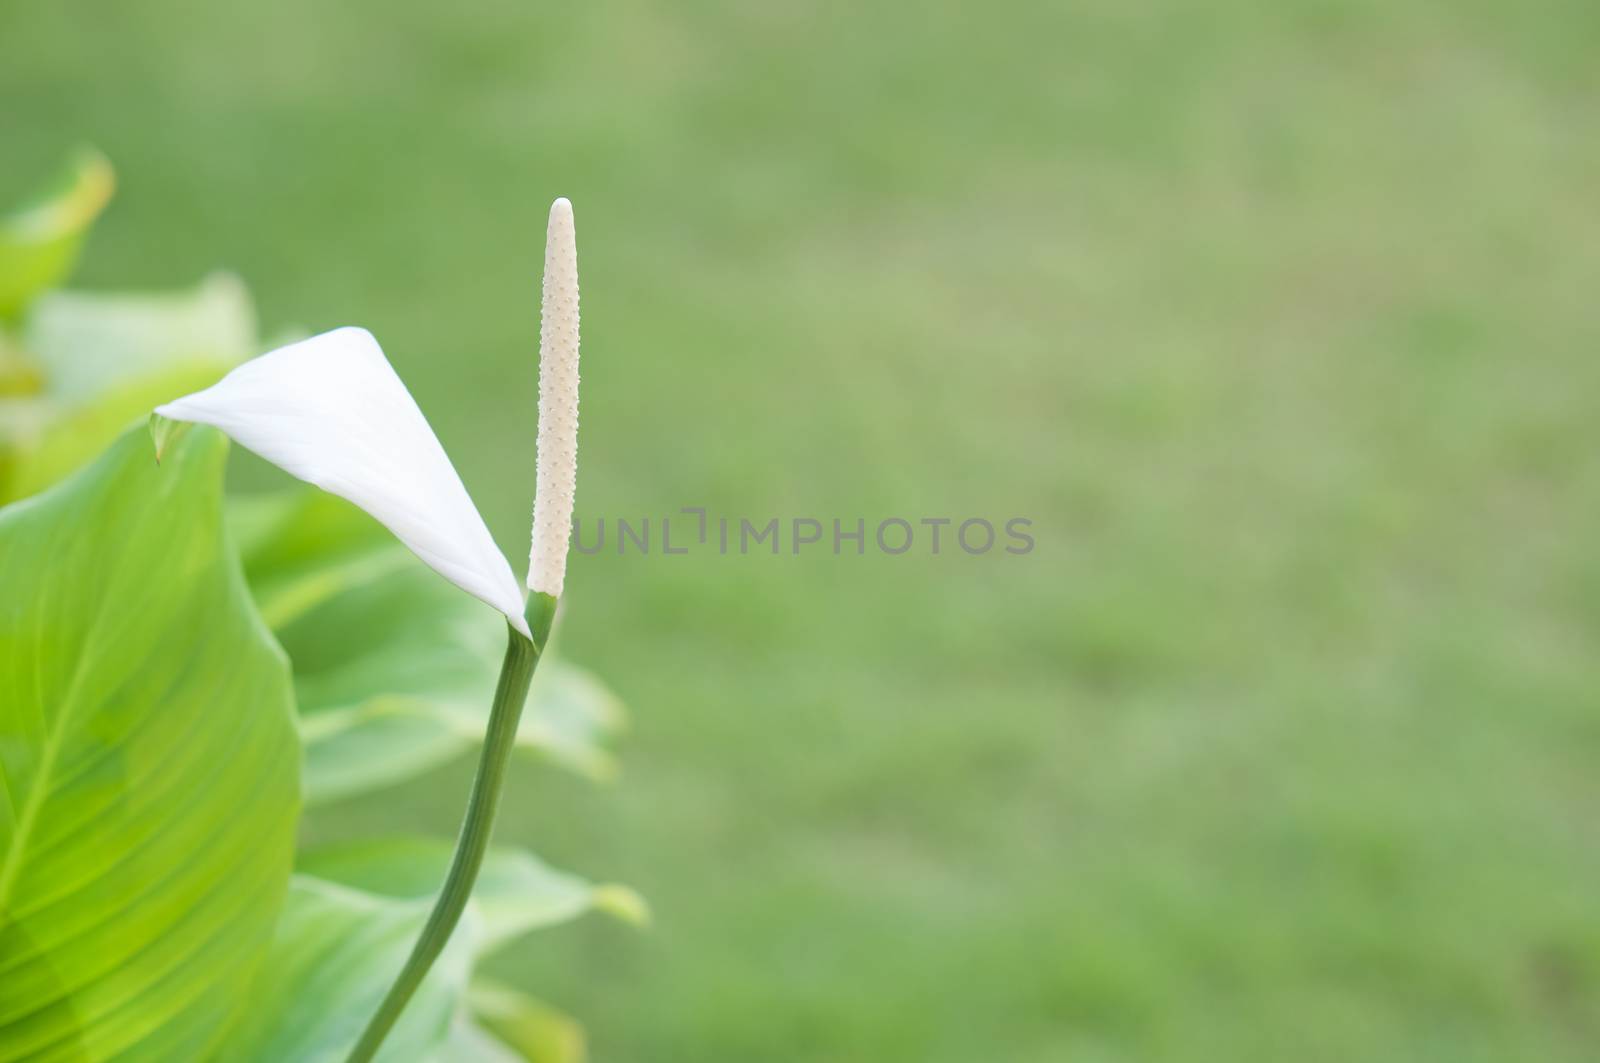 Spathiphyllum wallisei or Peace lily with blur green background by eaglesky